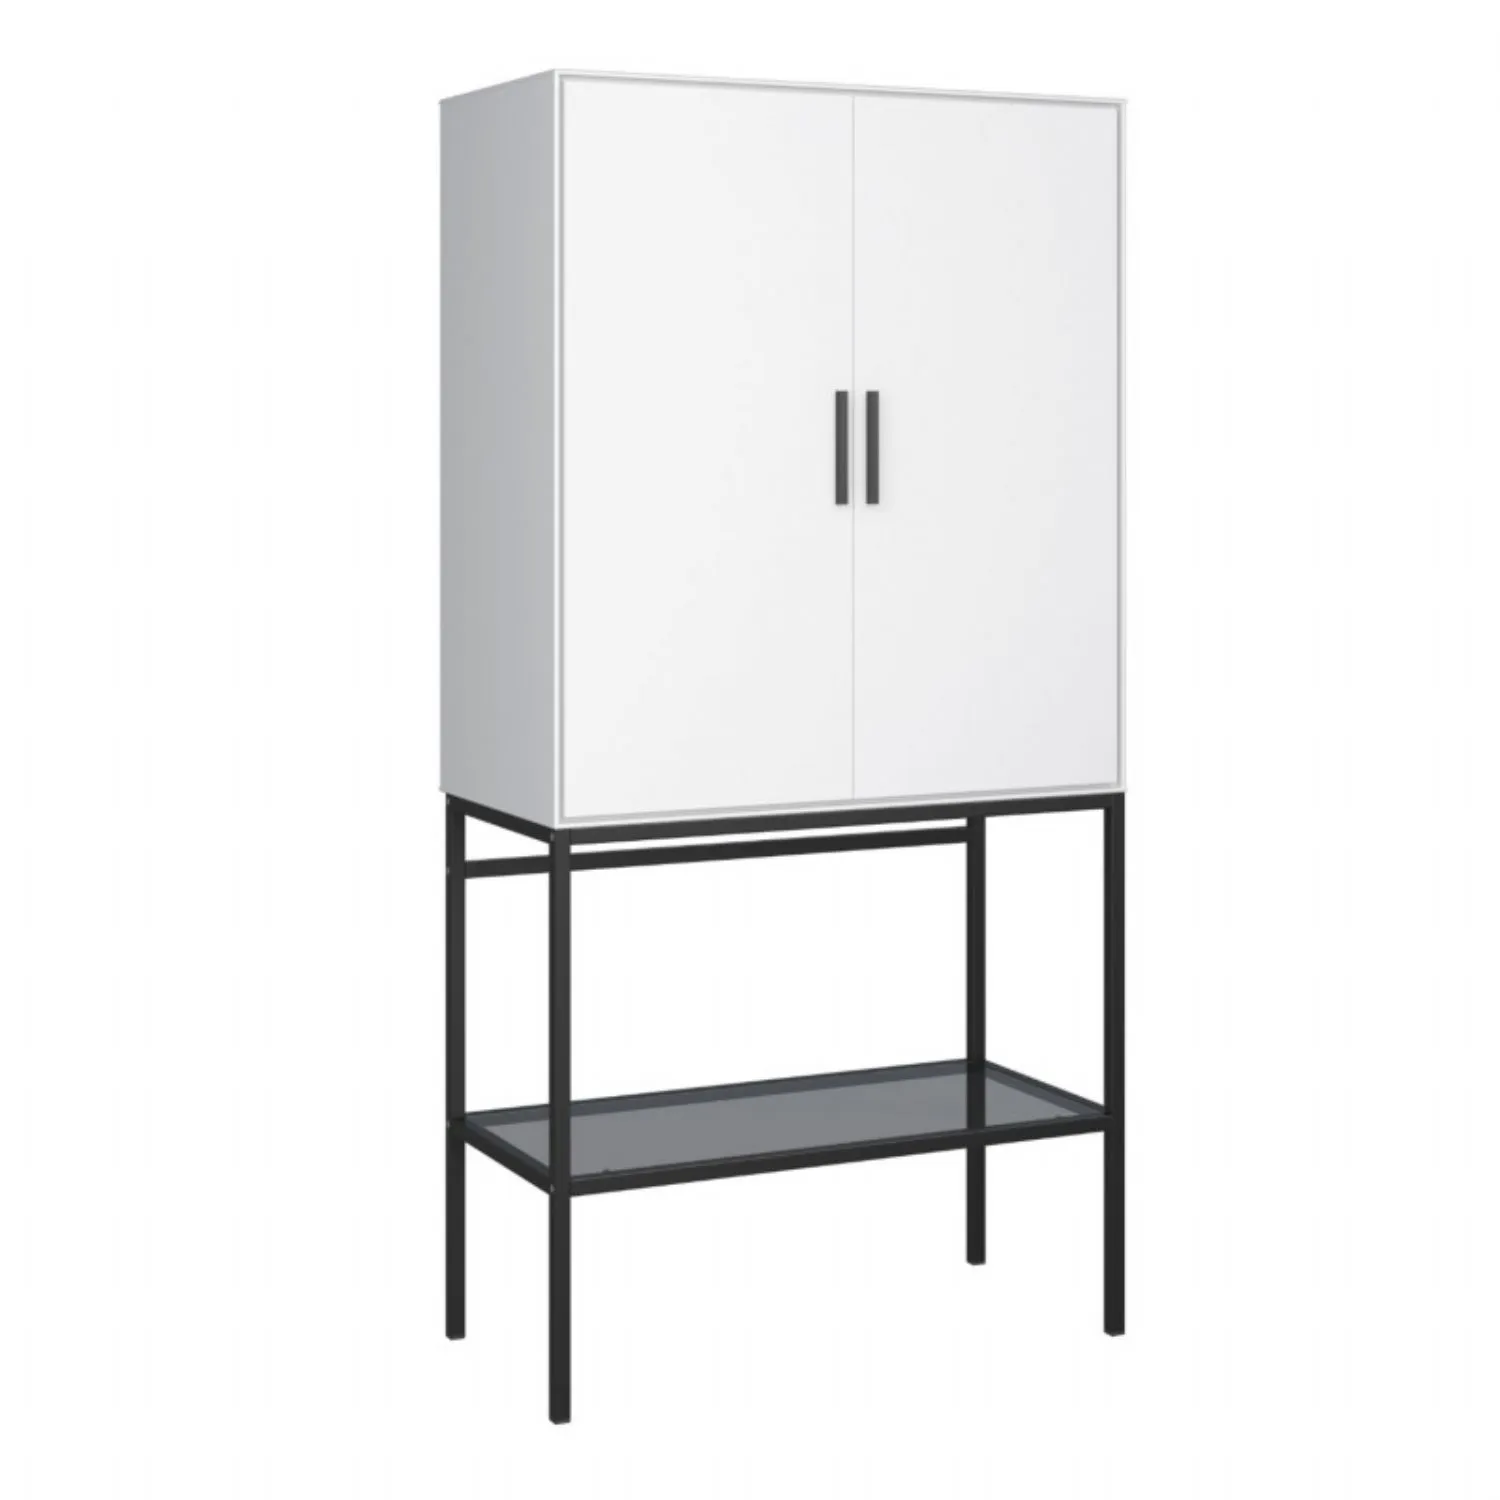 2 Door Tall Cabinet in Pure White with Steel Black Legs